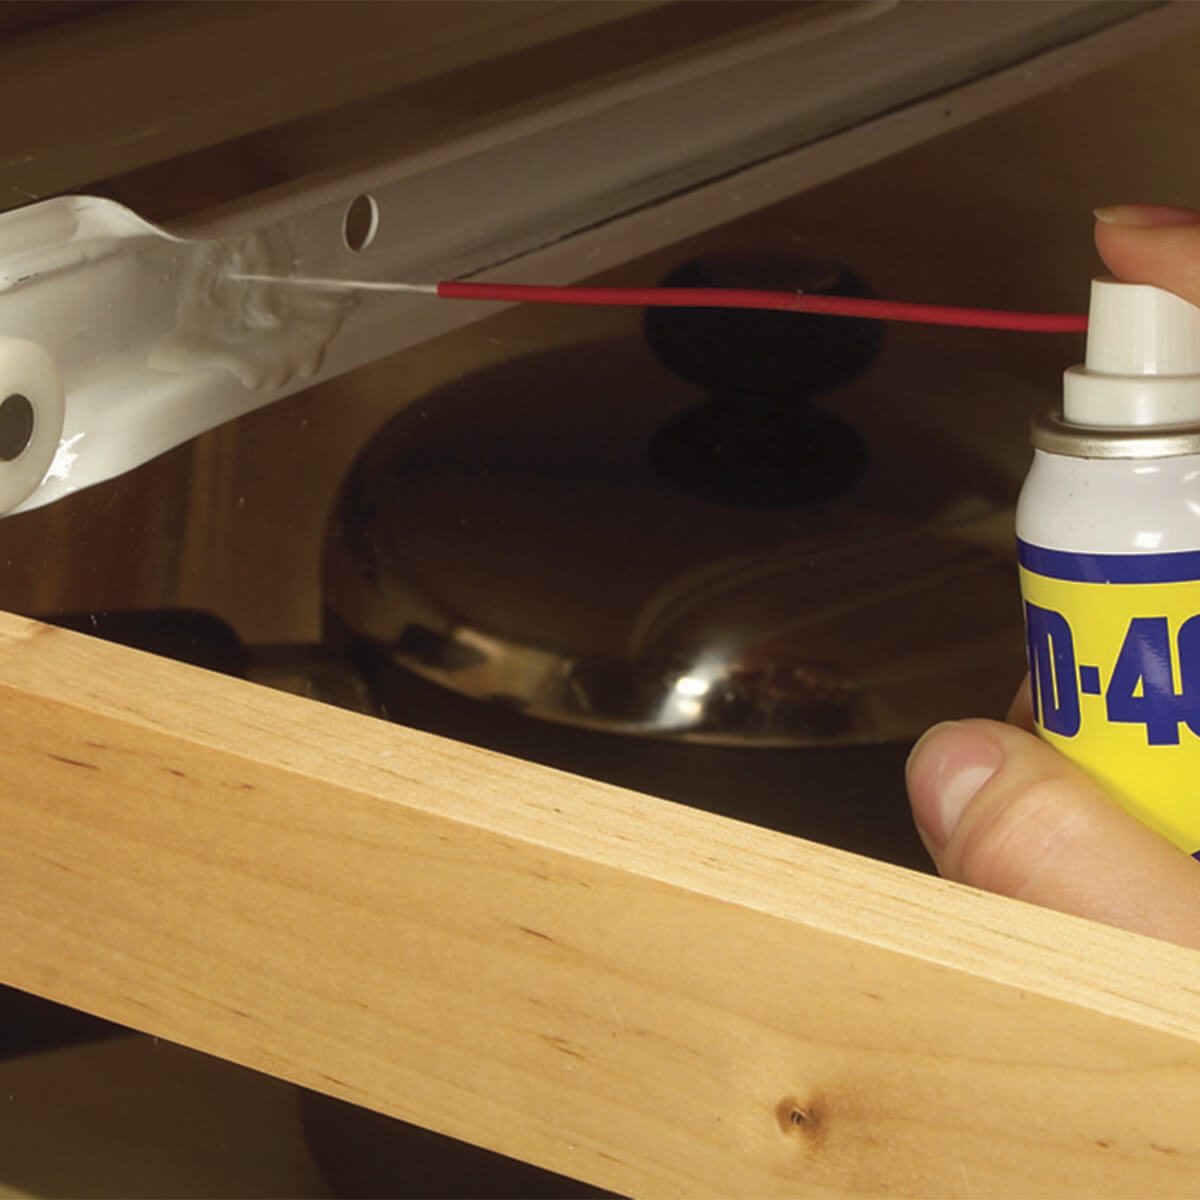 How to fix a drawer: lubricate sticking drawers